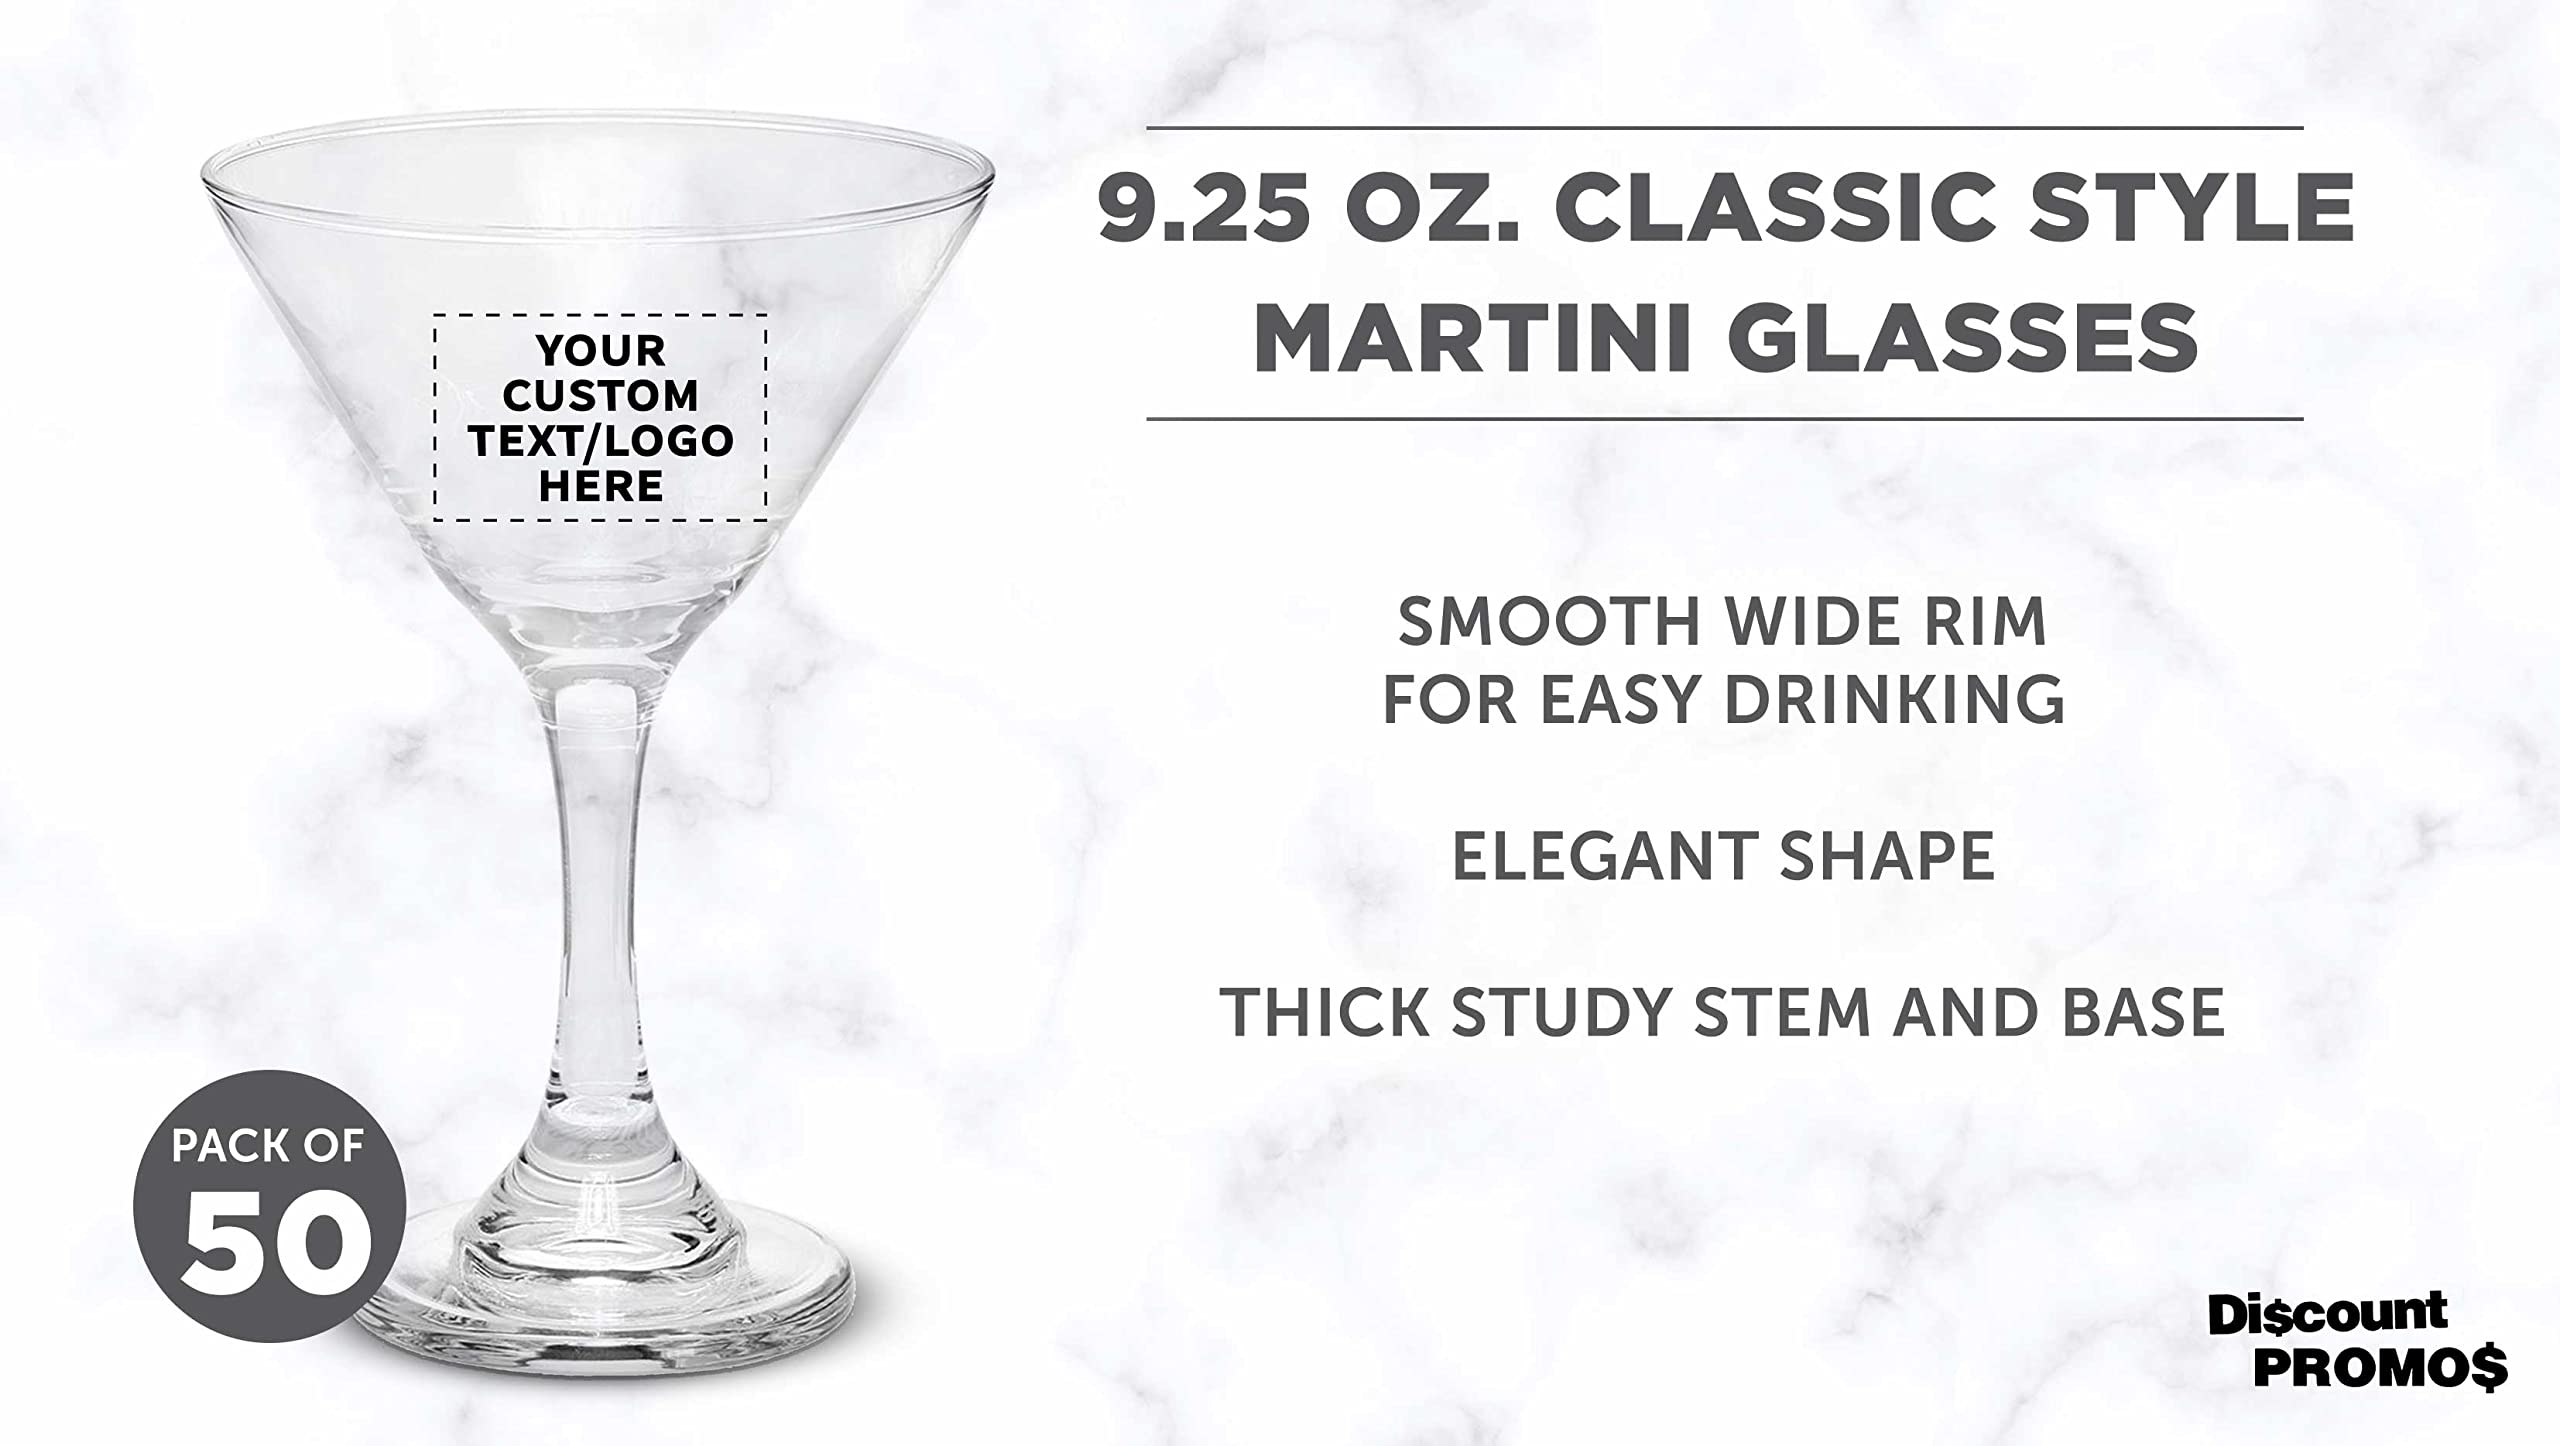 Custom Classic Martini Glasses 9.25 oz. Set of 50, Personalized Bulk Pack - Great for Cocktails, Wedding Favors, Party Favors, Events - Clear